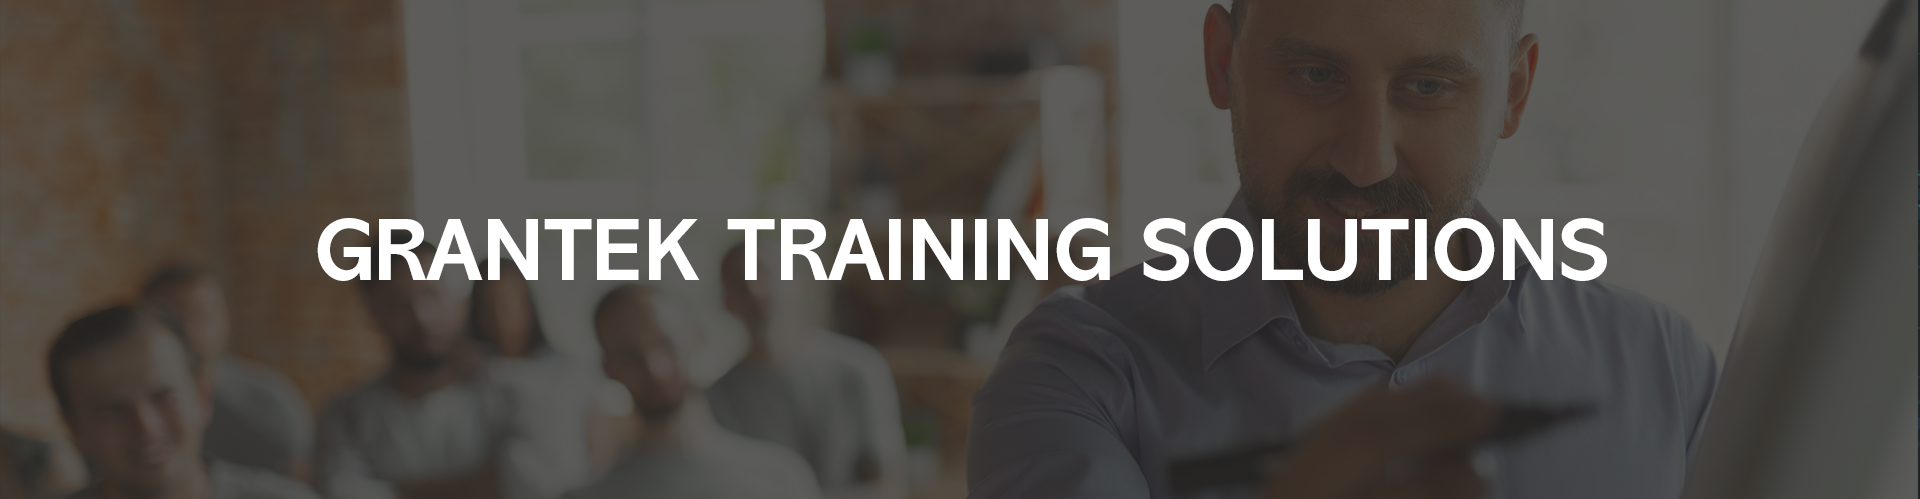 Transform Performance with Grantek’s Training Solutions